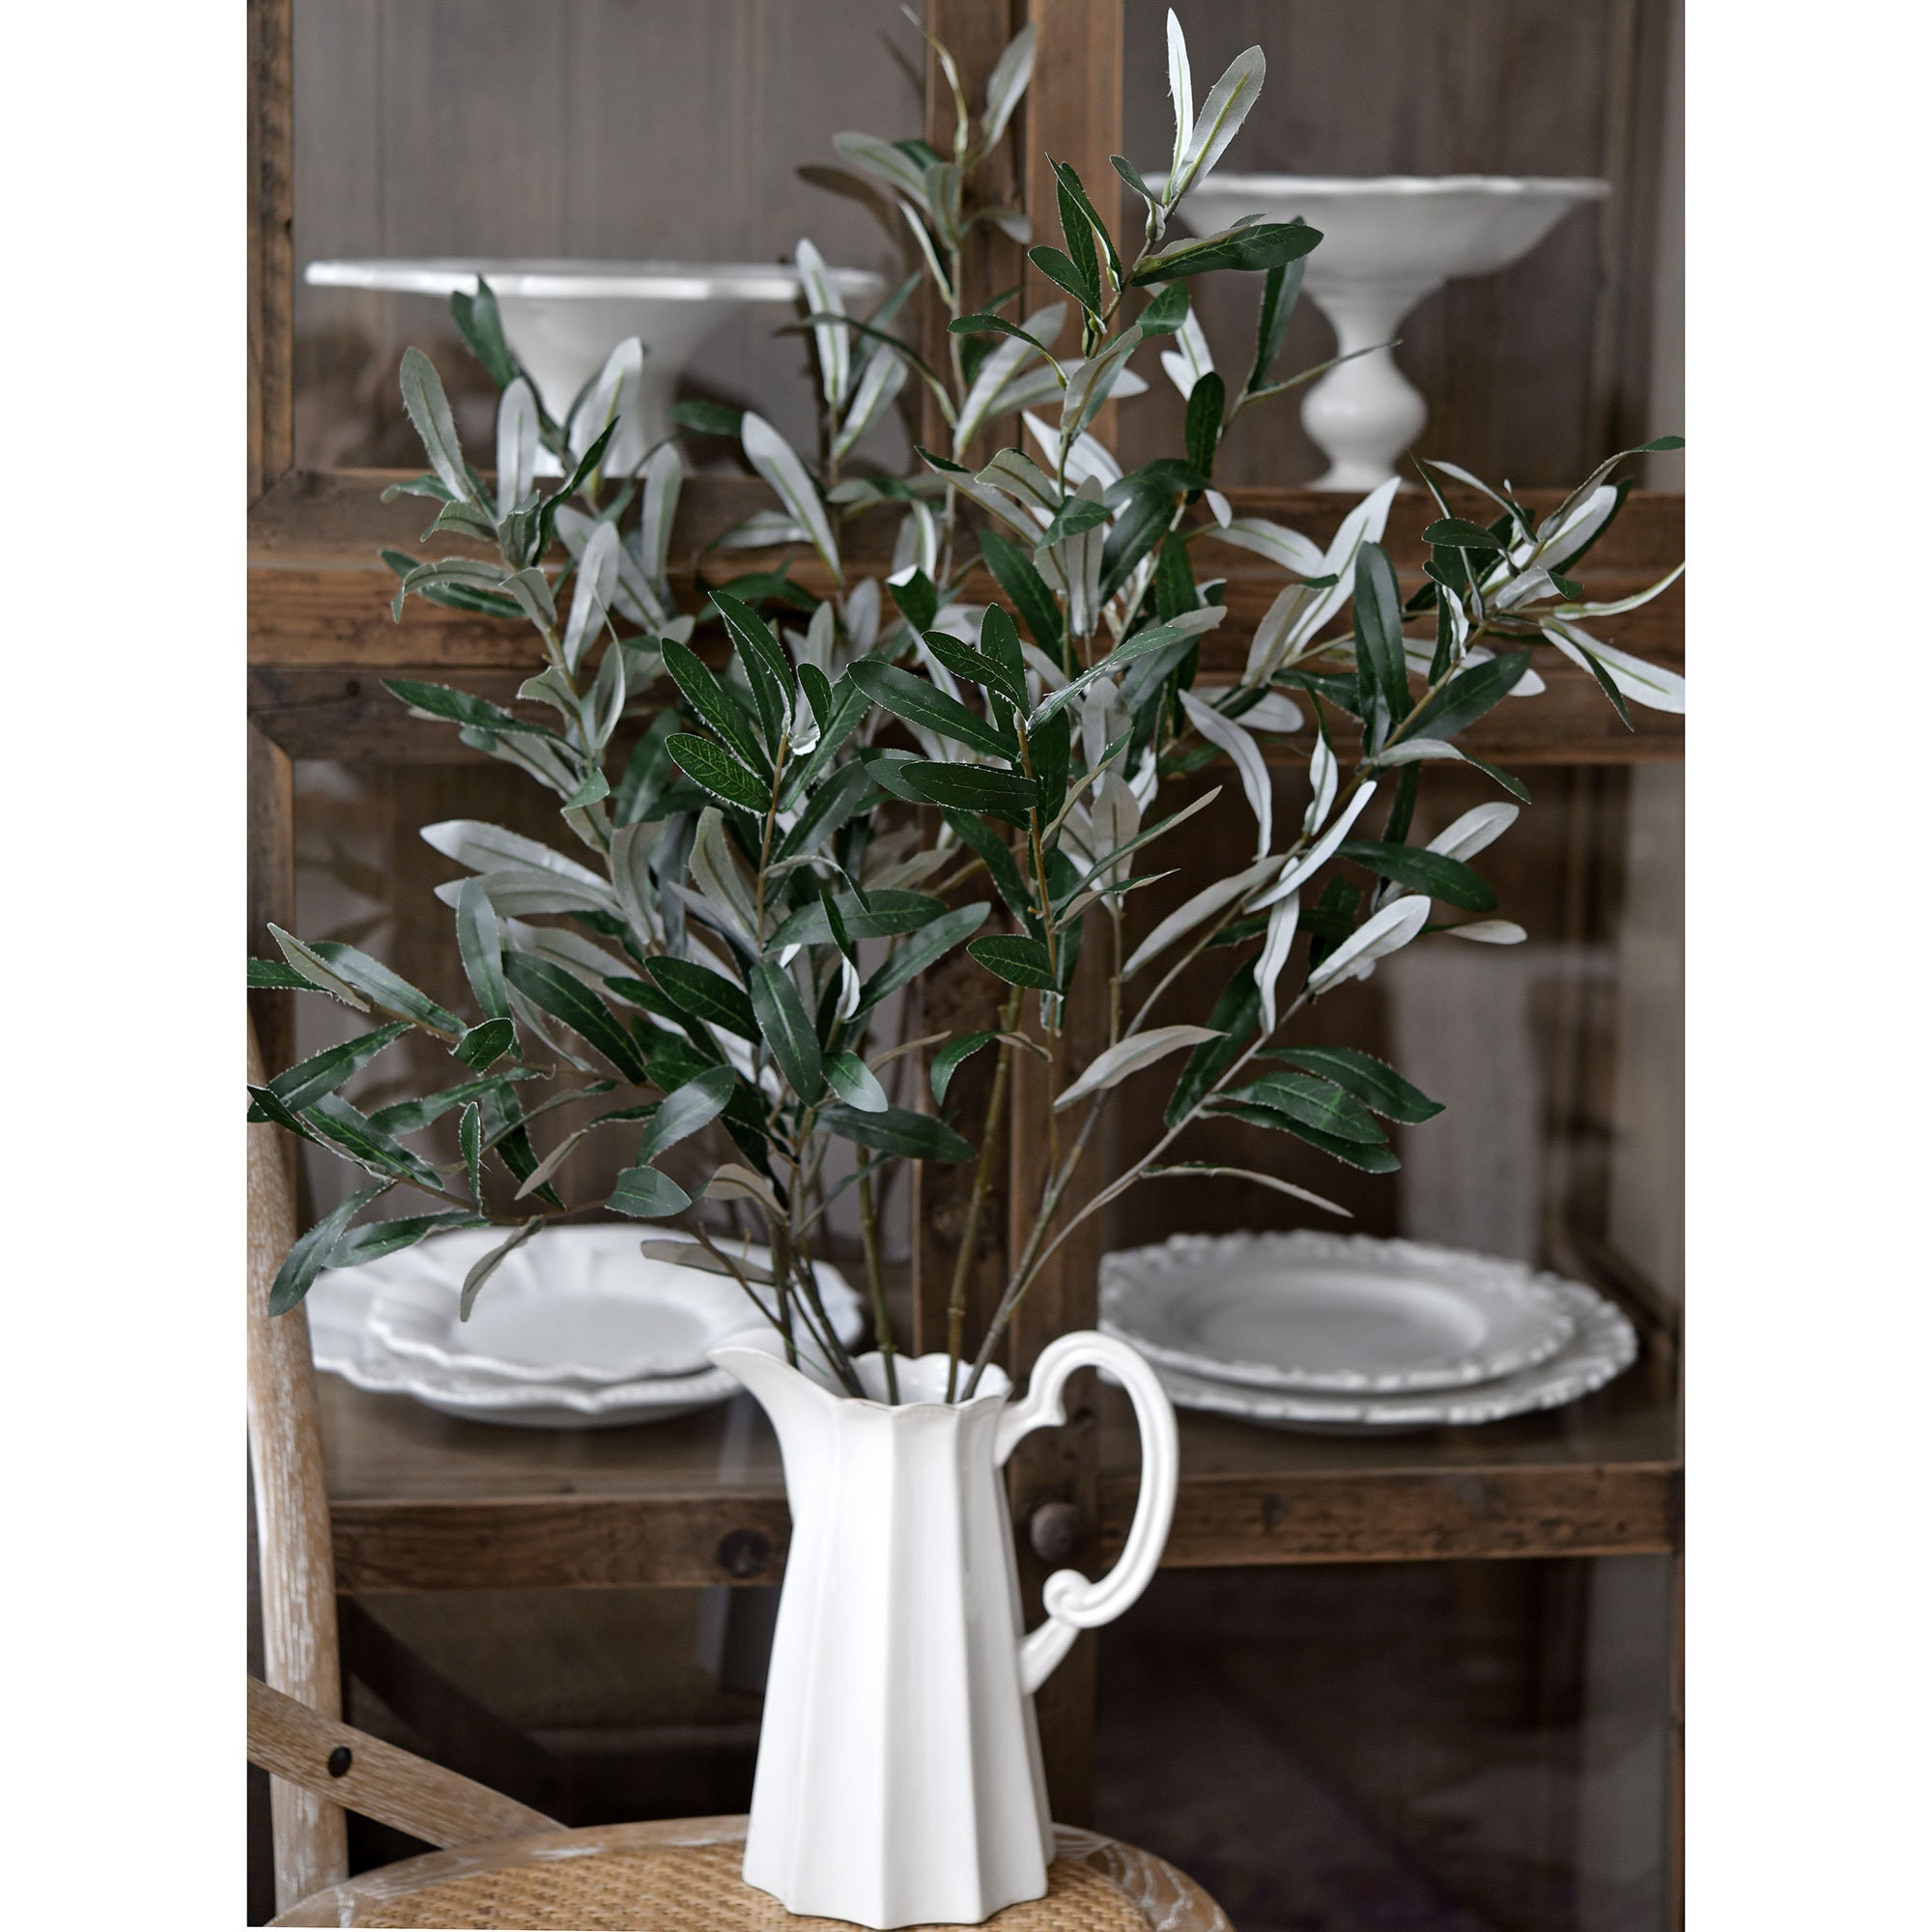 Lifelike Premium Olive Stems: Quality 30-inch Artificial Greenery for Floral  Arrangements and Stylish Decor 6 Stems Fiveseasonstuff Floral 